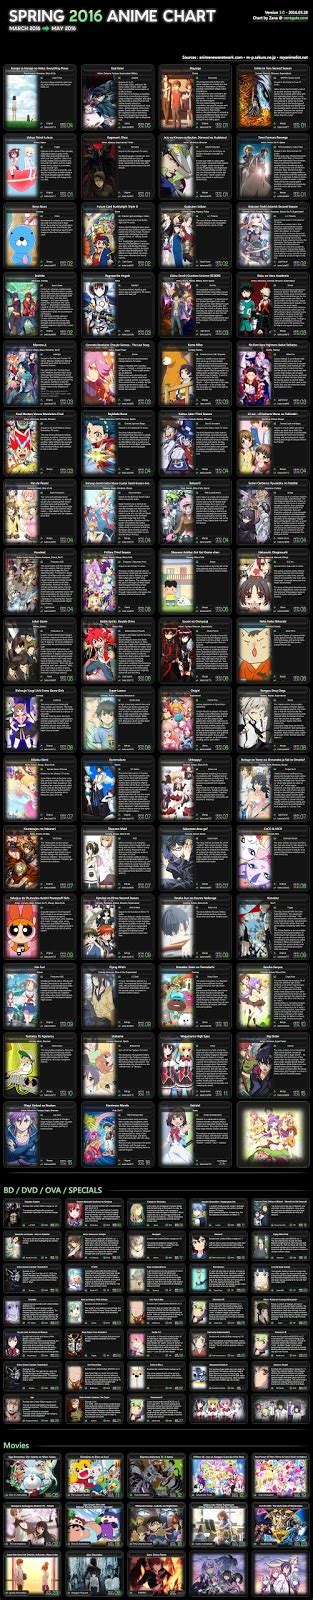 Anime OST And Japanese Music Lyrics Neregate Spring Anime Chart Old Picture